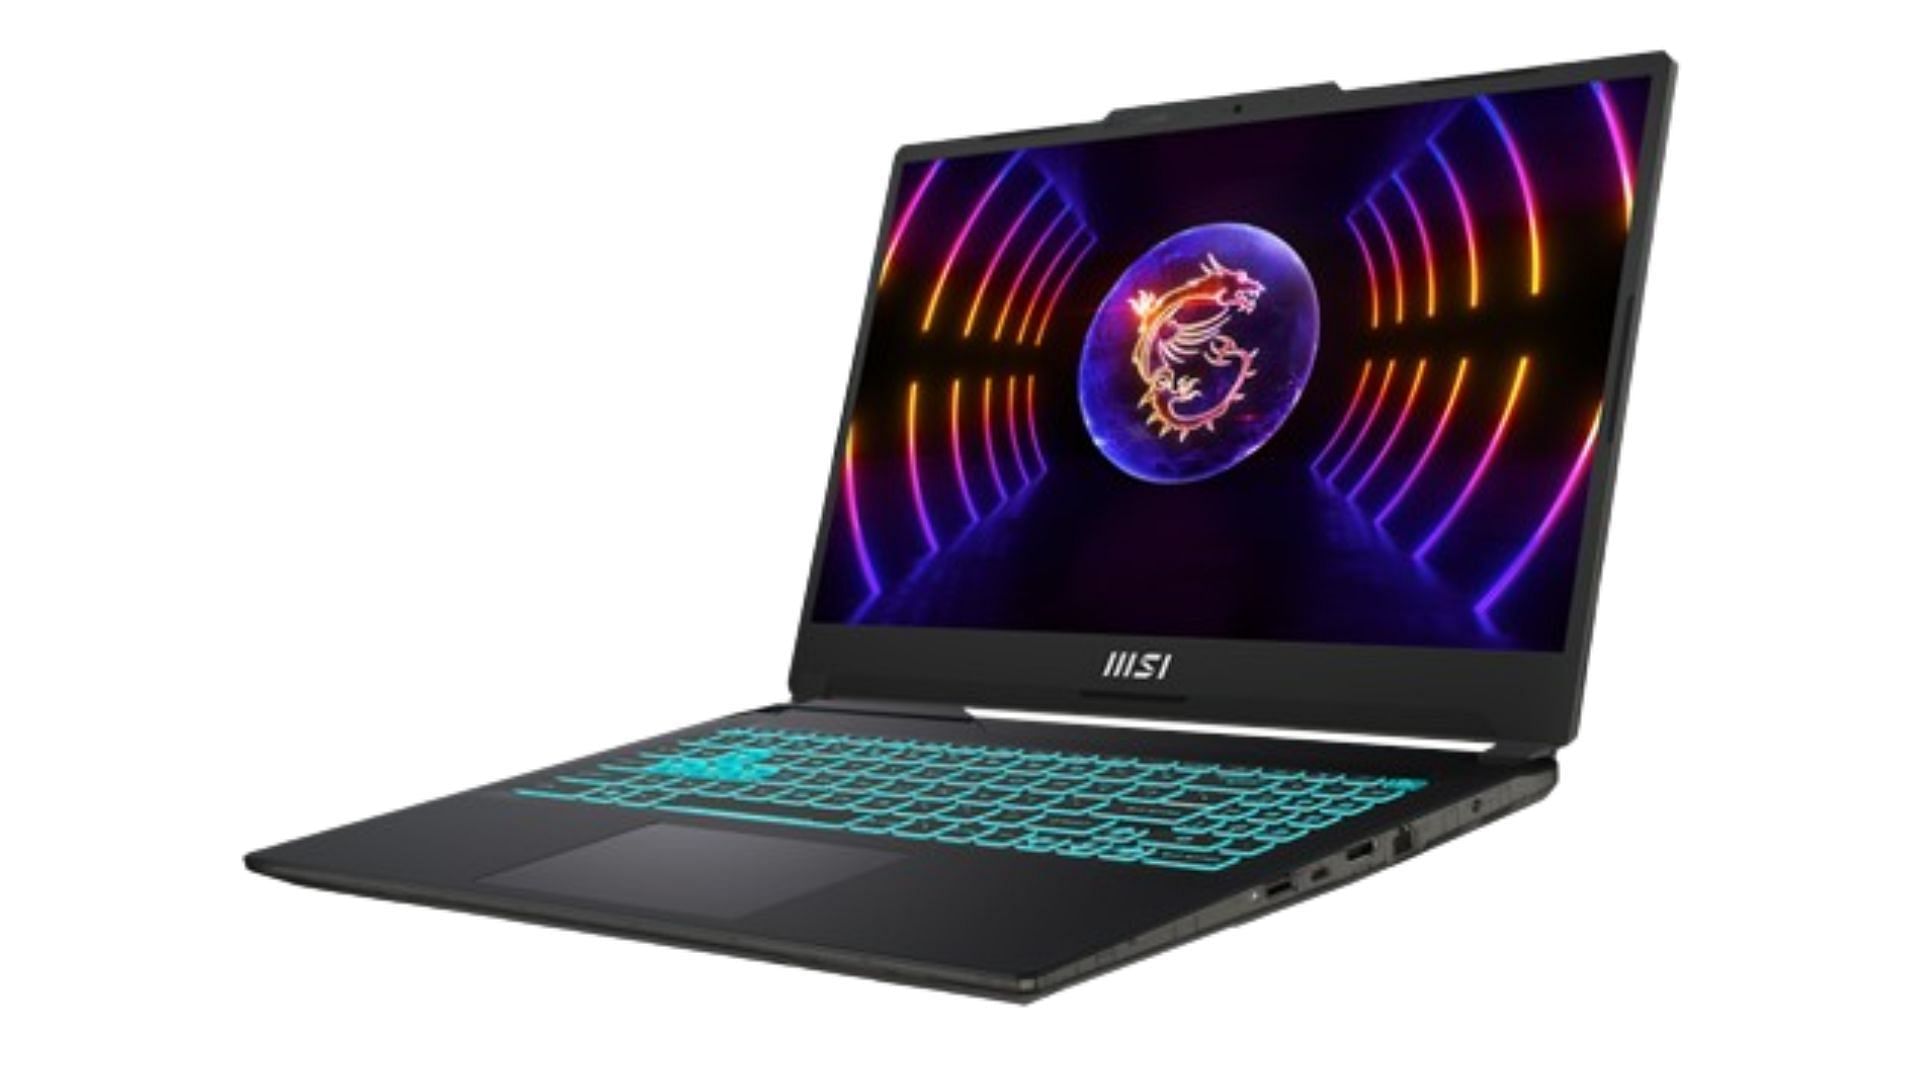 MSI Cyborg 15 - best budget gaming laptop for F1 24 (Image via MSI)